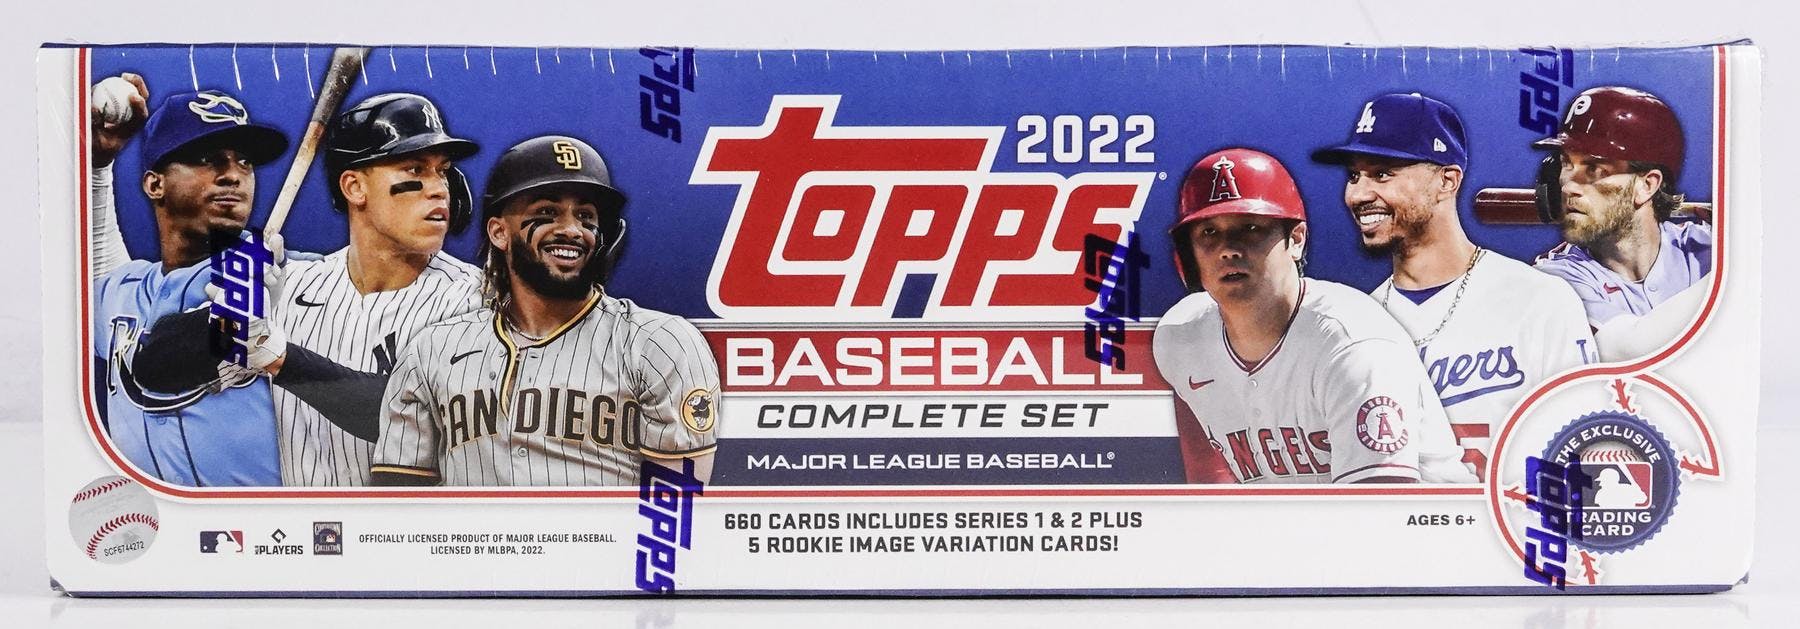 Tampa Bay Rays / 2022 Topps Baseball Team Set (Series 1 and 2) with (23)  Cards. Wander Franco Rookie Card! PLUS 2021 Topps Rays Baseball Team Set